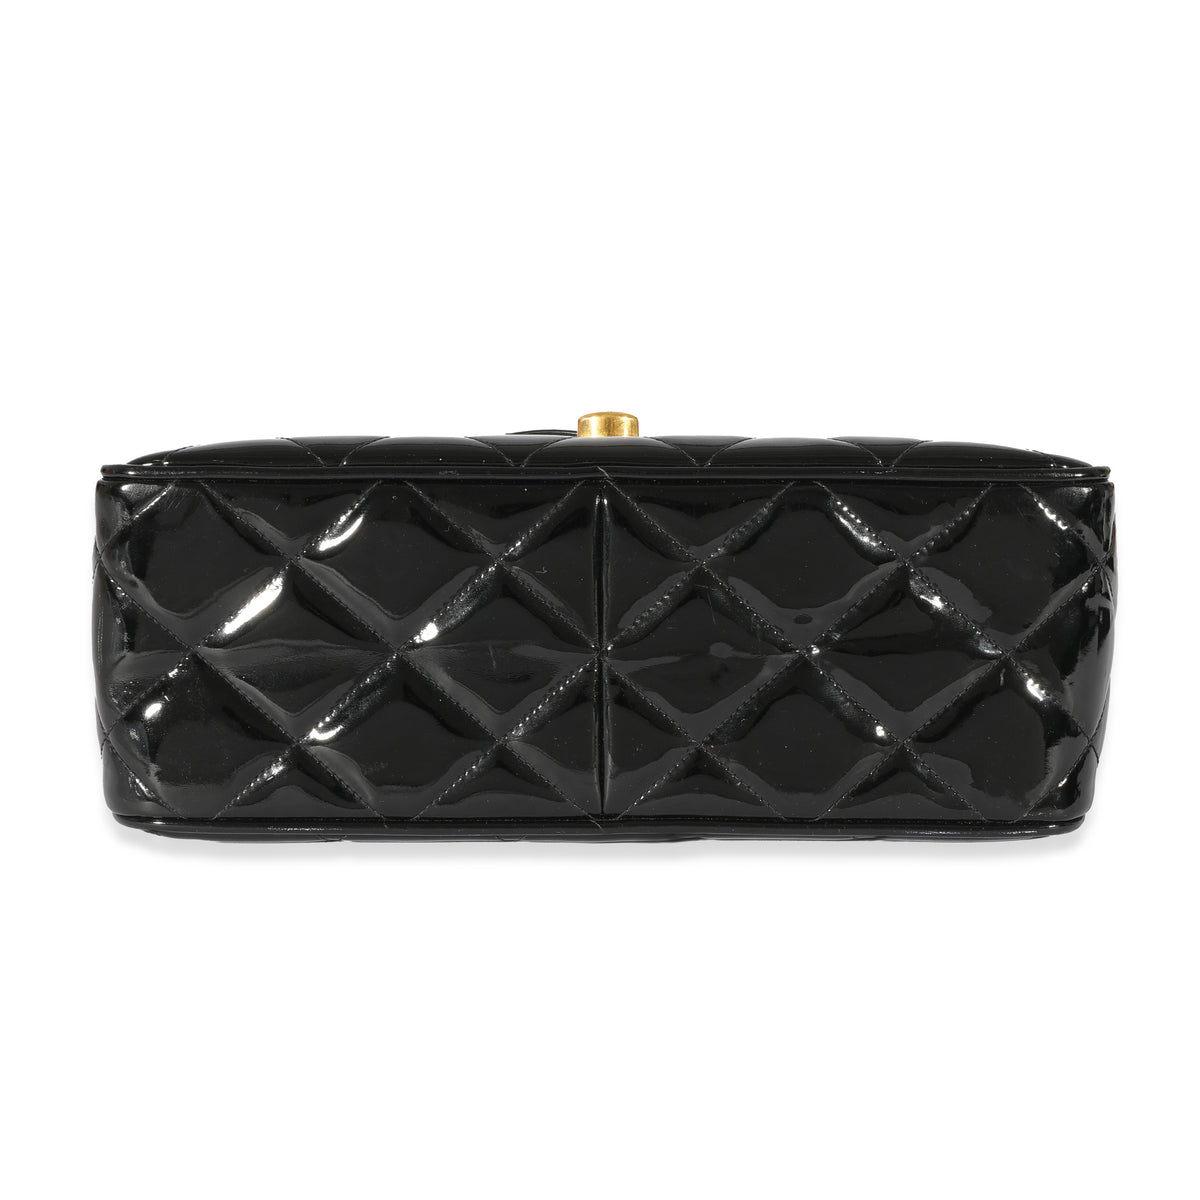 Chanel '90s Vintage Black Patent Leather Quilted Zip Around Bag